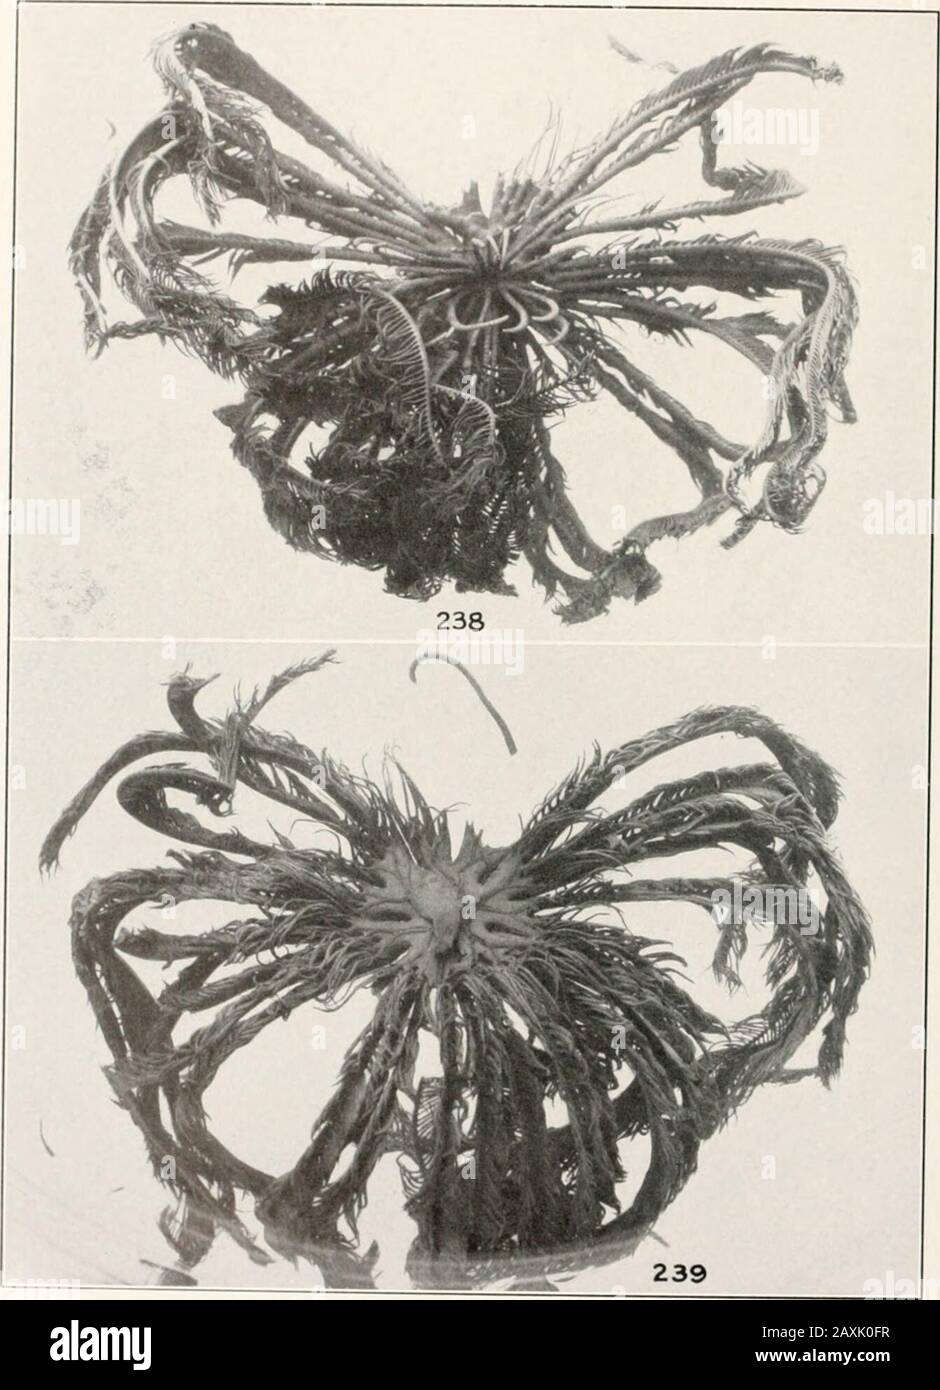 Bulletin - United States National Museum . 231, 232, Stephanometra protcclus: 231, The type specimen of llimeromelra acuta from Fiji (M. C. /... 2SS) (seealso fig. 228); 232. the type specimen of //. heliaster from Ebon, Marshall Islands, pinnules, X 2(M. C. Z., 290) (see also fig. 227).233, 234, Stephanometra indica: 233, Specimen from lat. 8°5130 N., long. 81*11*52 E., in 51 meters, collected by the Investigator (U.S.N.M., 35107); -;4, same, proximal pinnules, X 2. 235-237, Pelomelra ambonensis: 235, The type specimen collected by the Danish Expedition I Kei 1 .lands at Amboina (C. M.); 236, Stock Photo